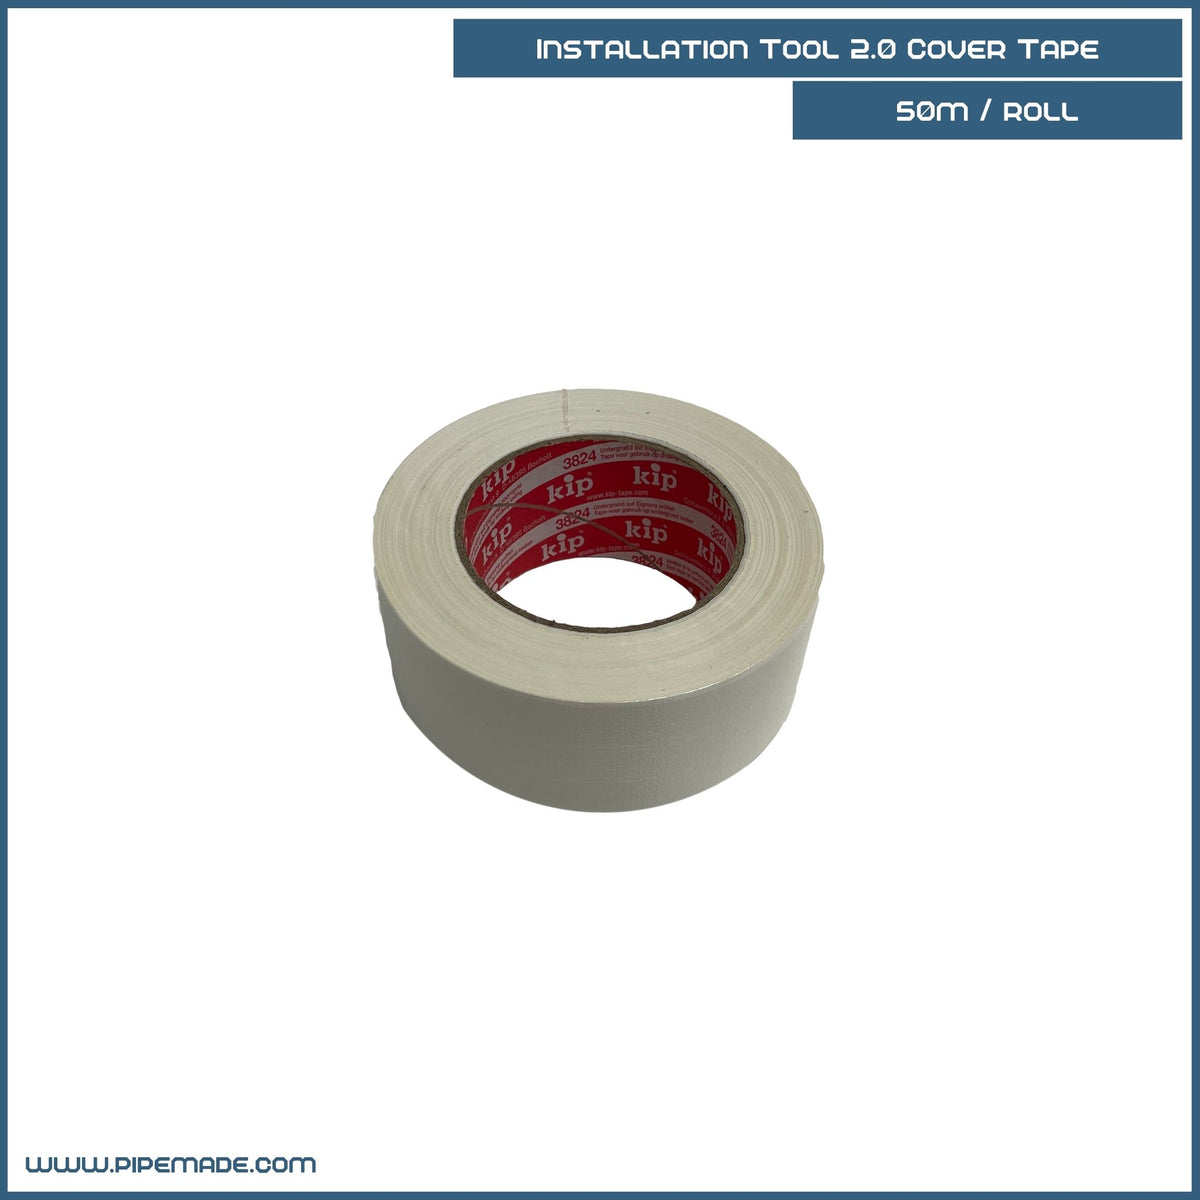 Installation Tool 2.0 Cover Tape | CIPP Lining Tools | Picote Solutions | picote-installation-tool-2-cover-tape